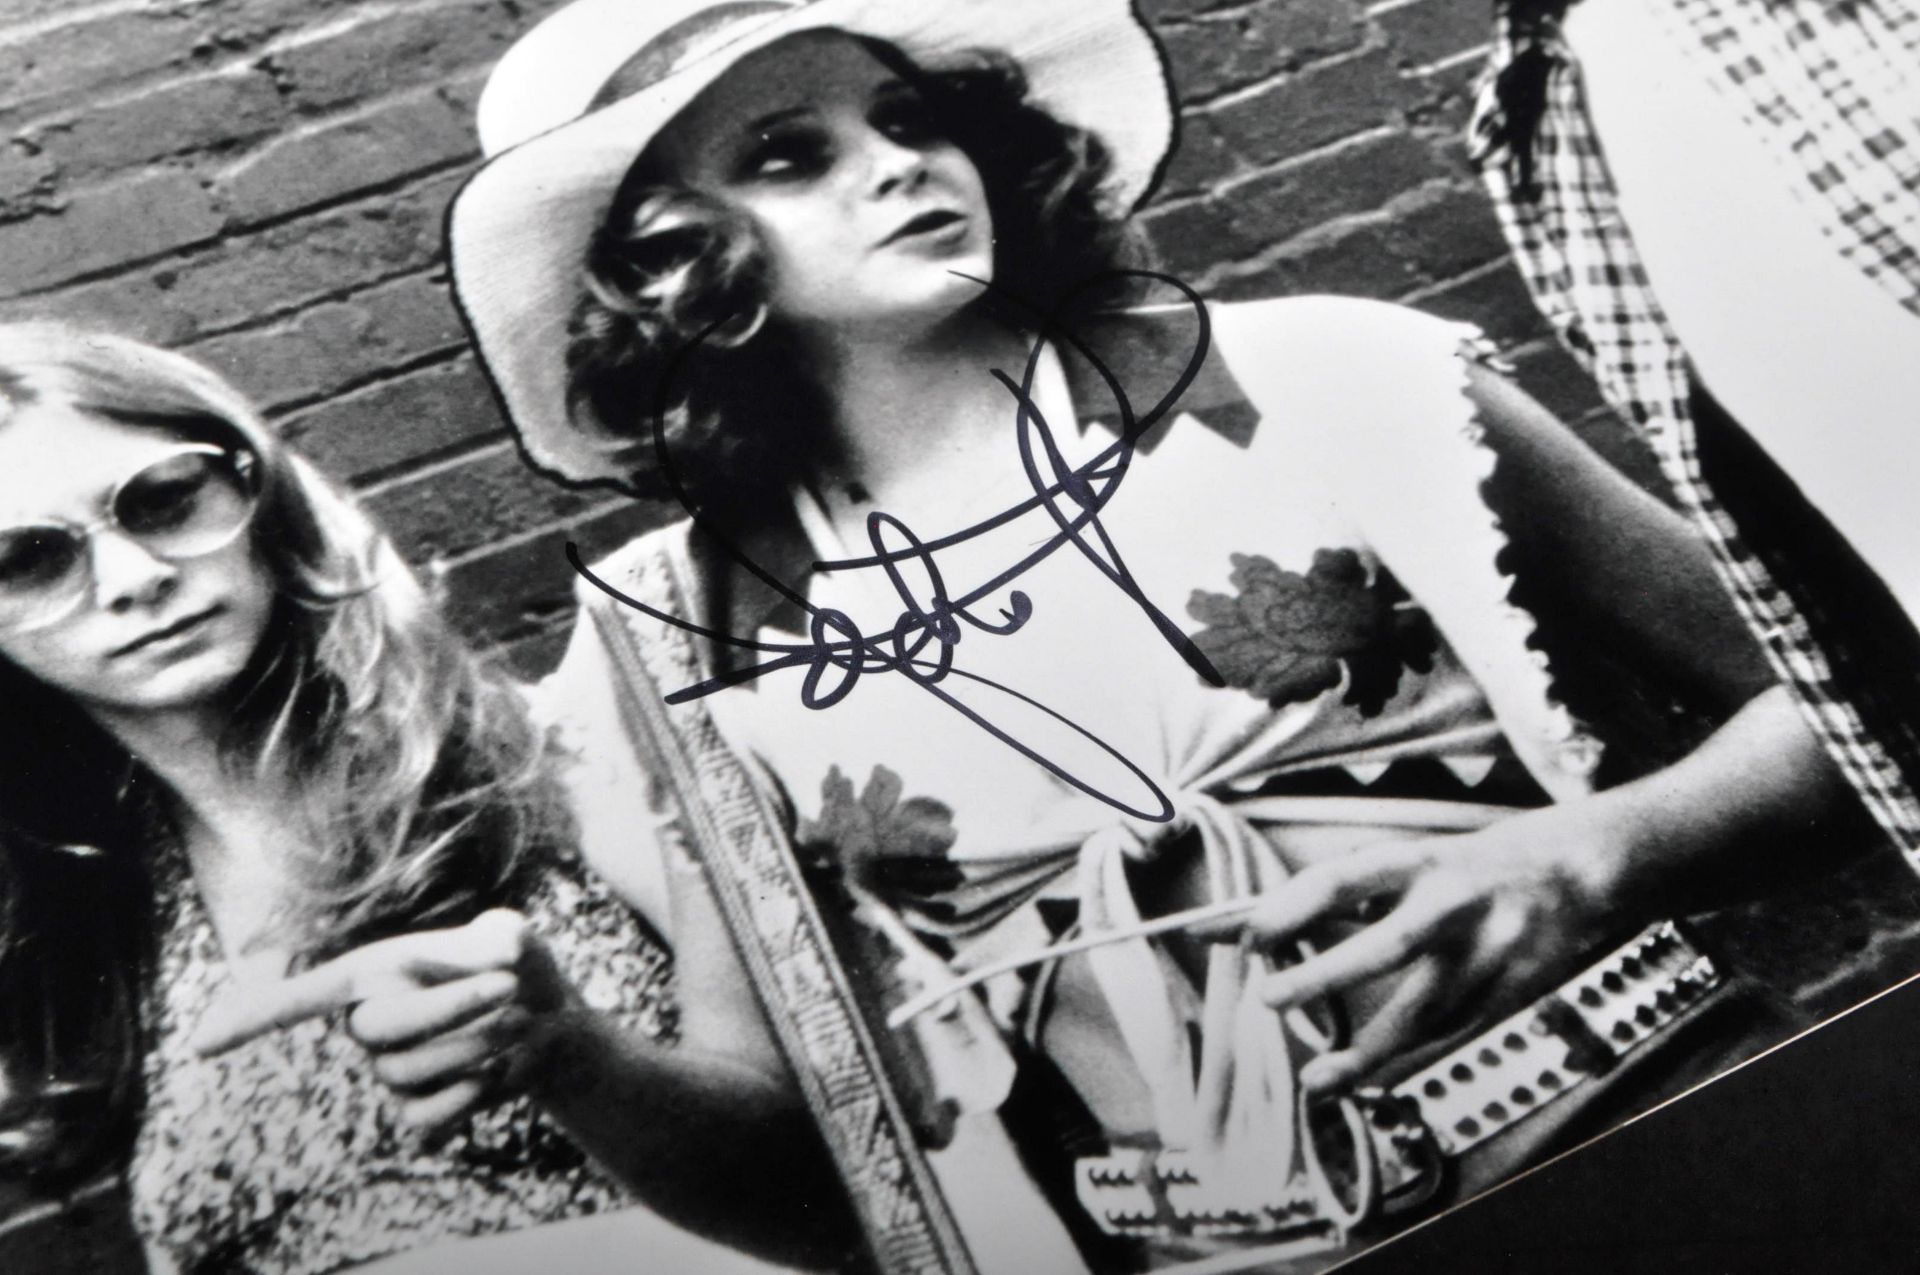 JODIE FOSTER - TAXI DRIVER - AUTOGRAPHED PHOTO - ACOA - Image 2 of 2